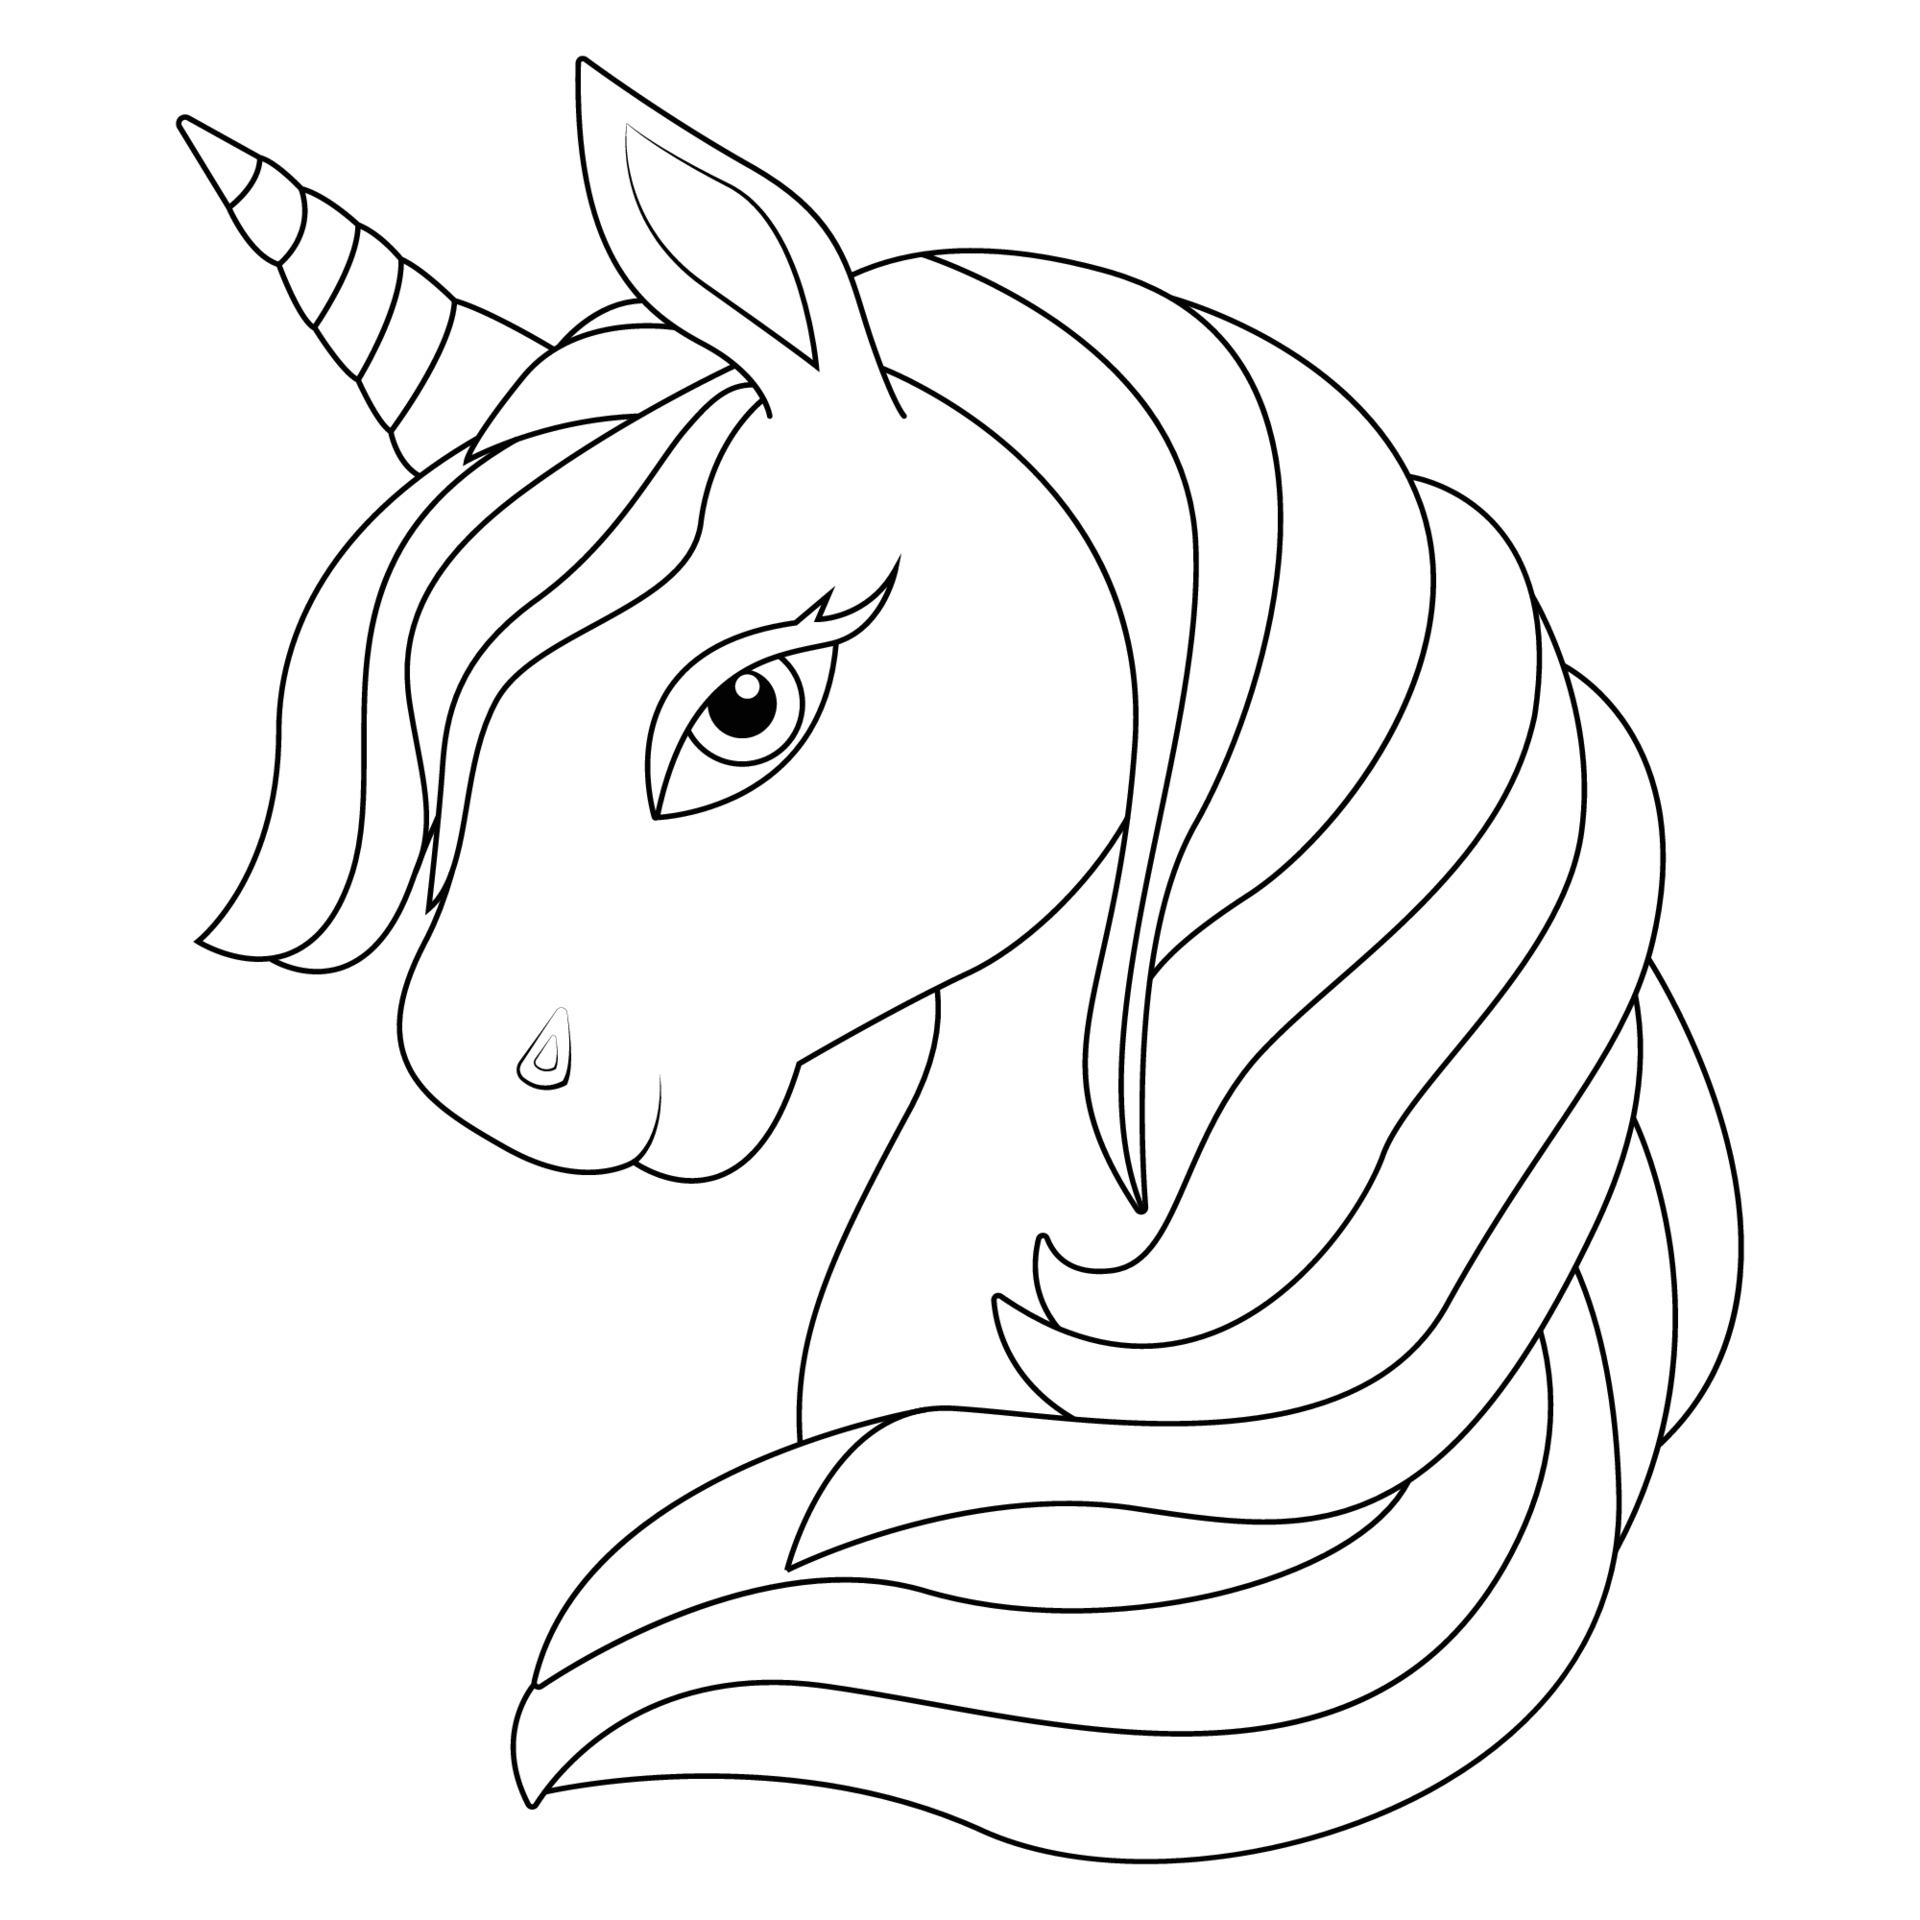 Cute Unicorn Coloring Page For Kids 18 Vector Art at Vecteezy